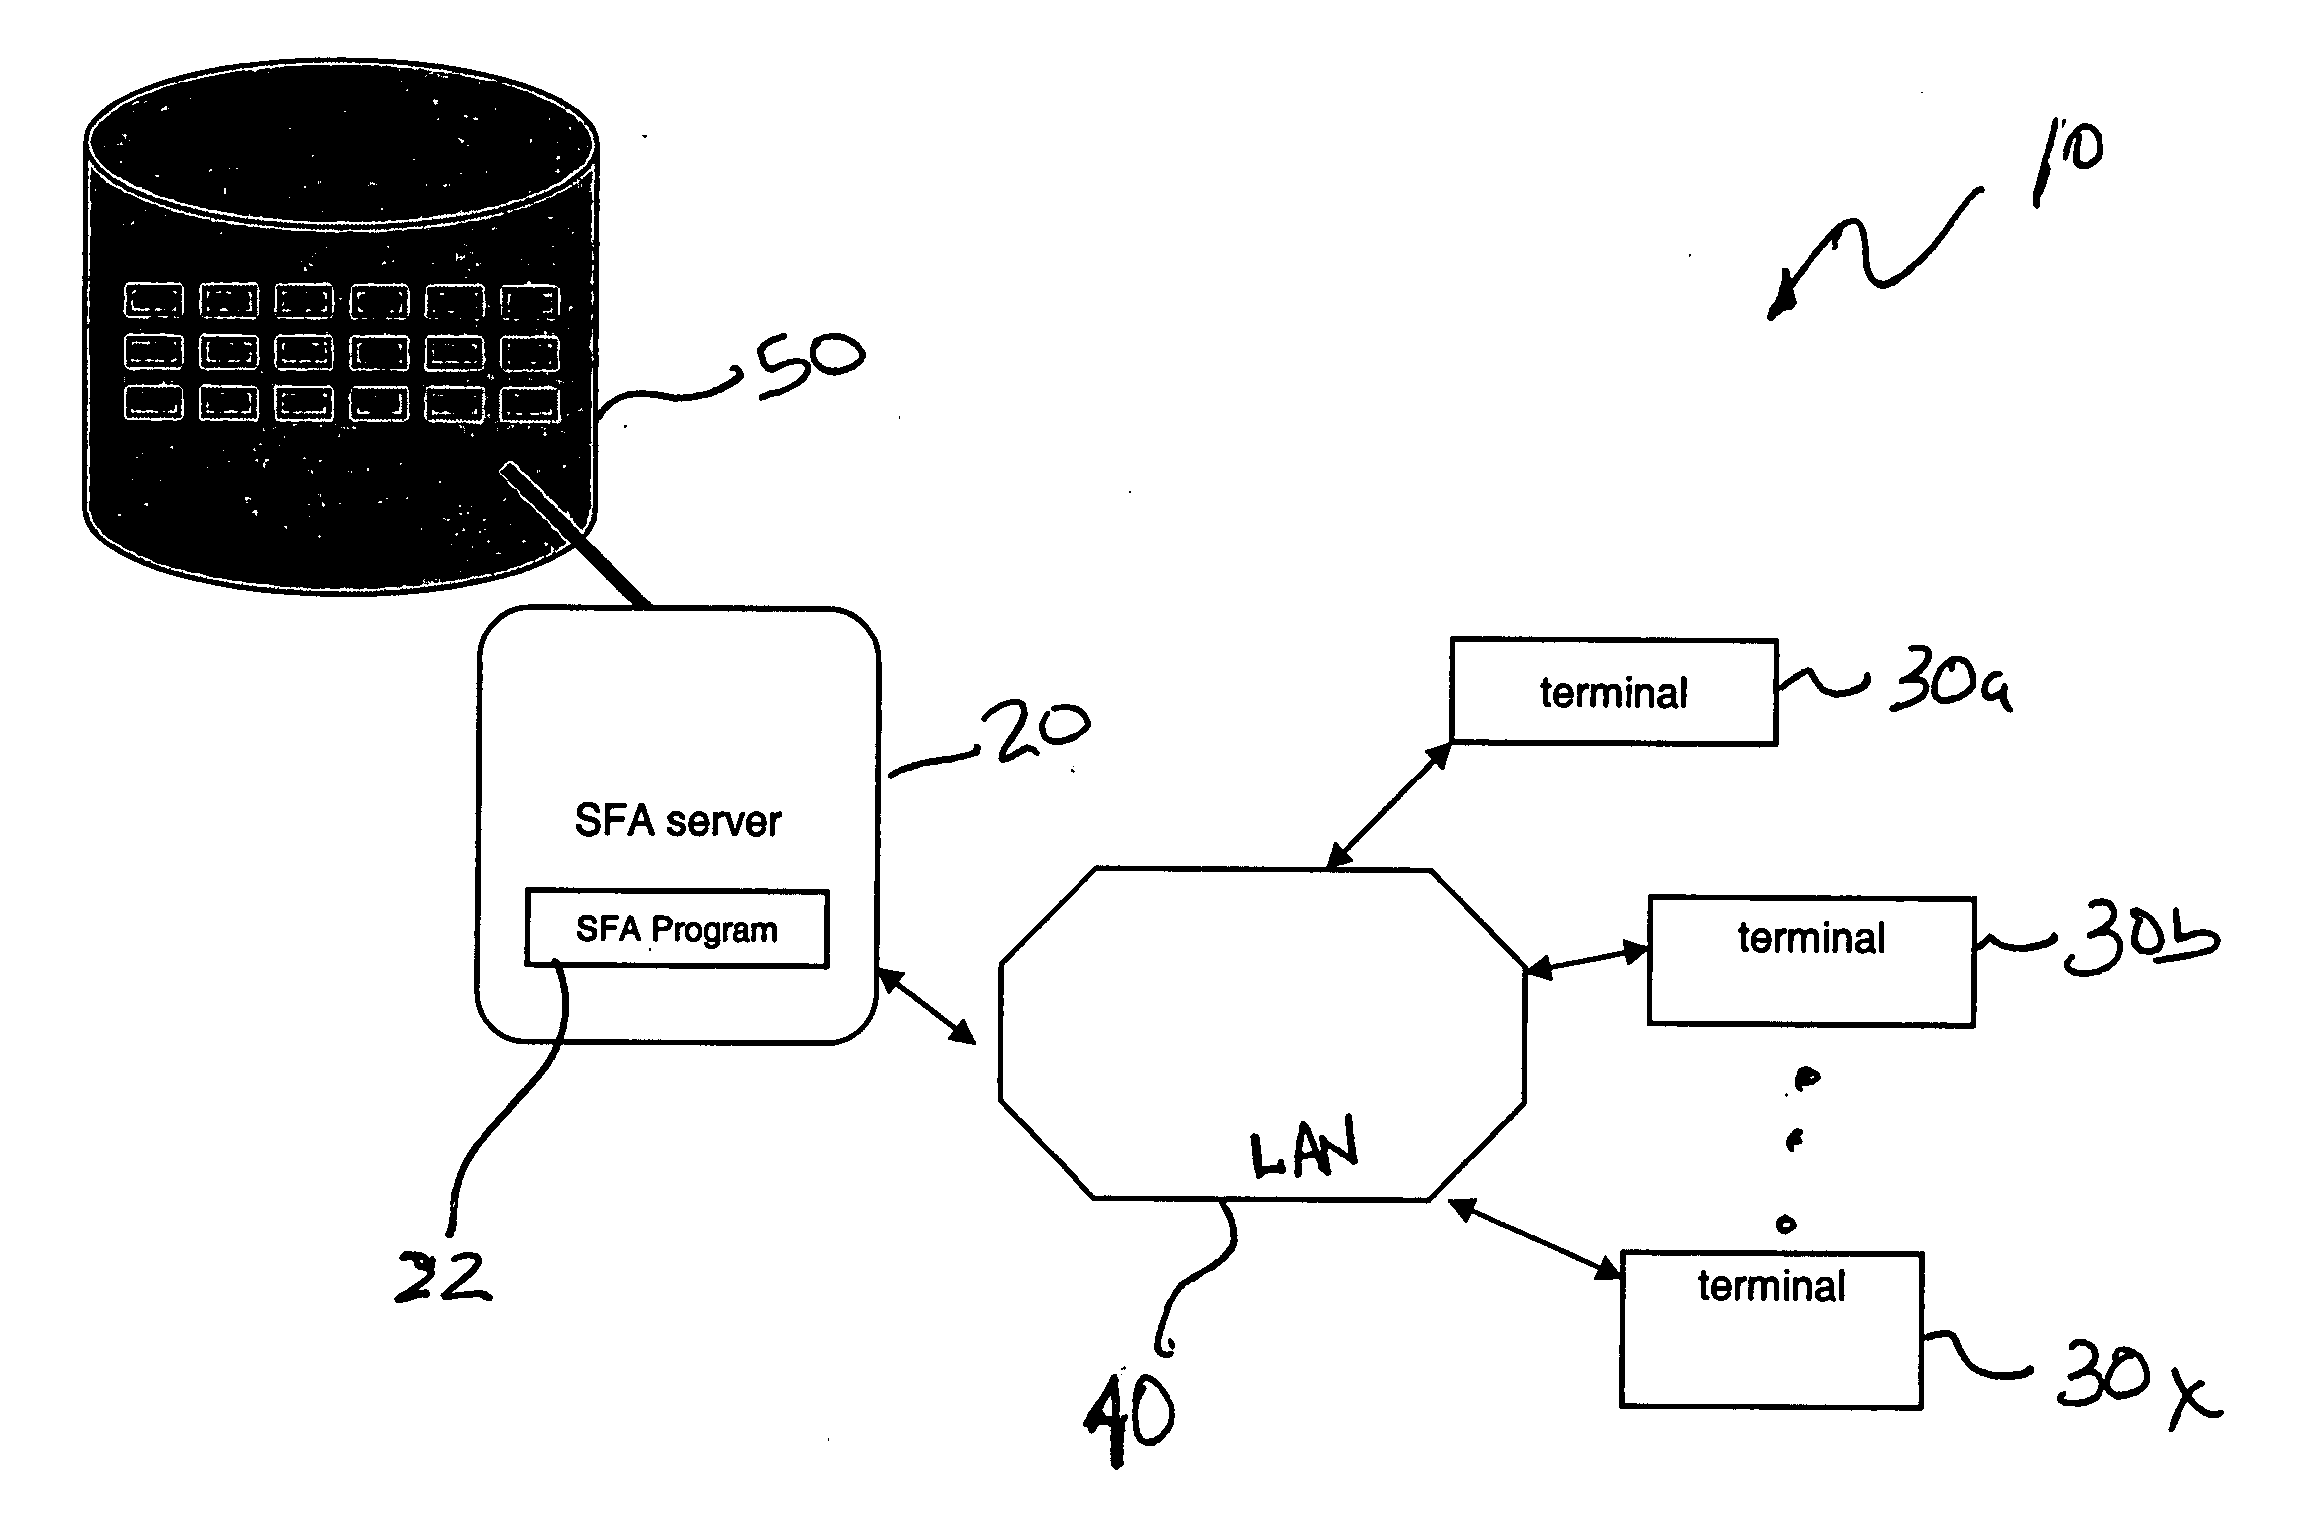 System and method for managing and analyzing data from an operational database